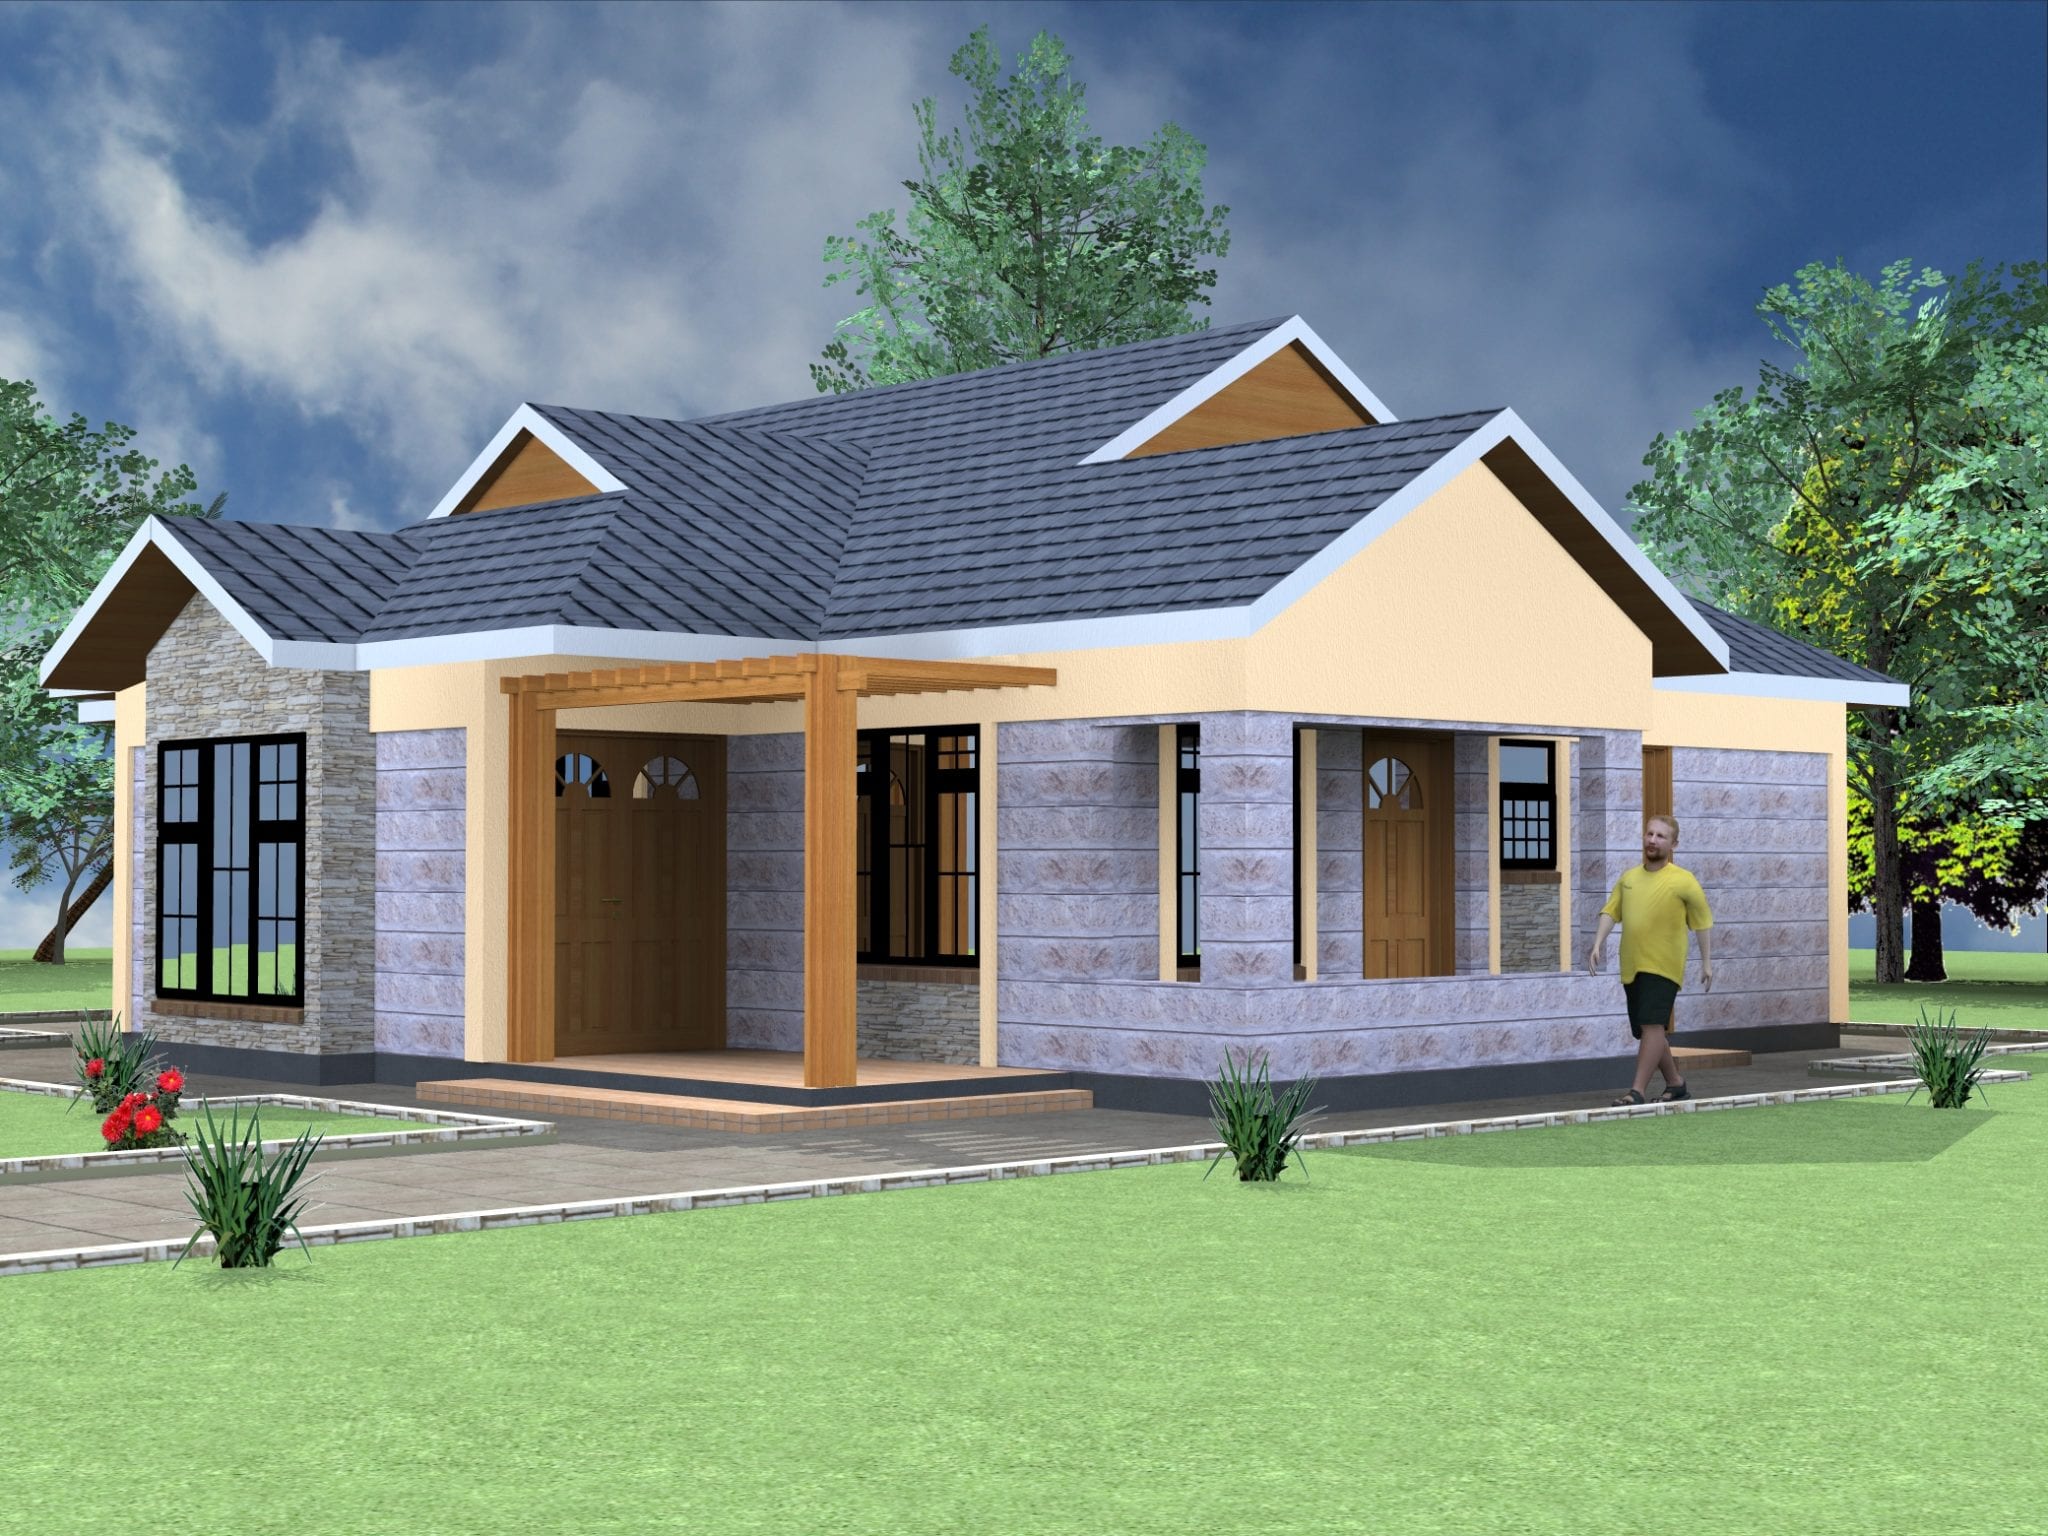  4  Bedroom  bungalow architectural design HPD Consult